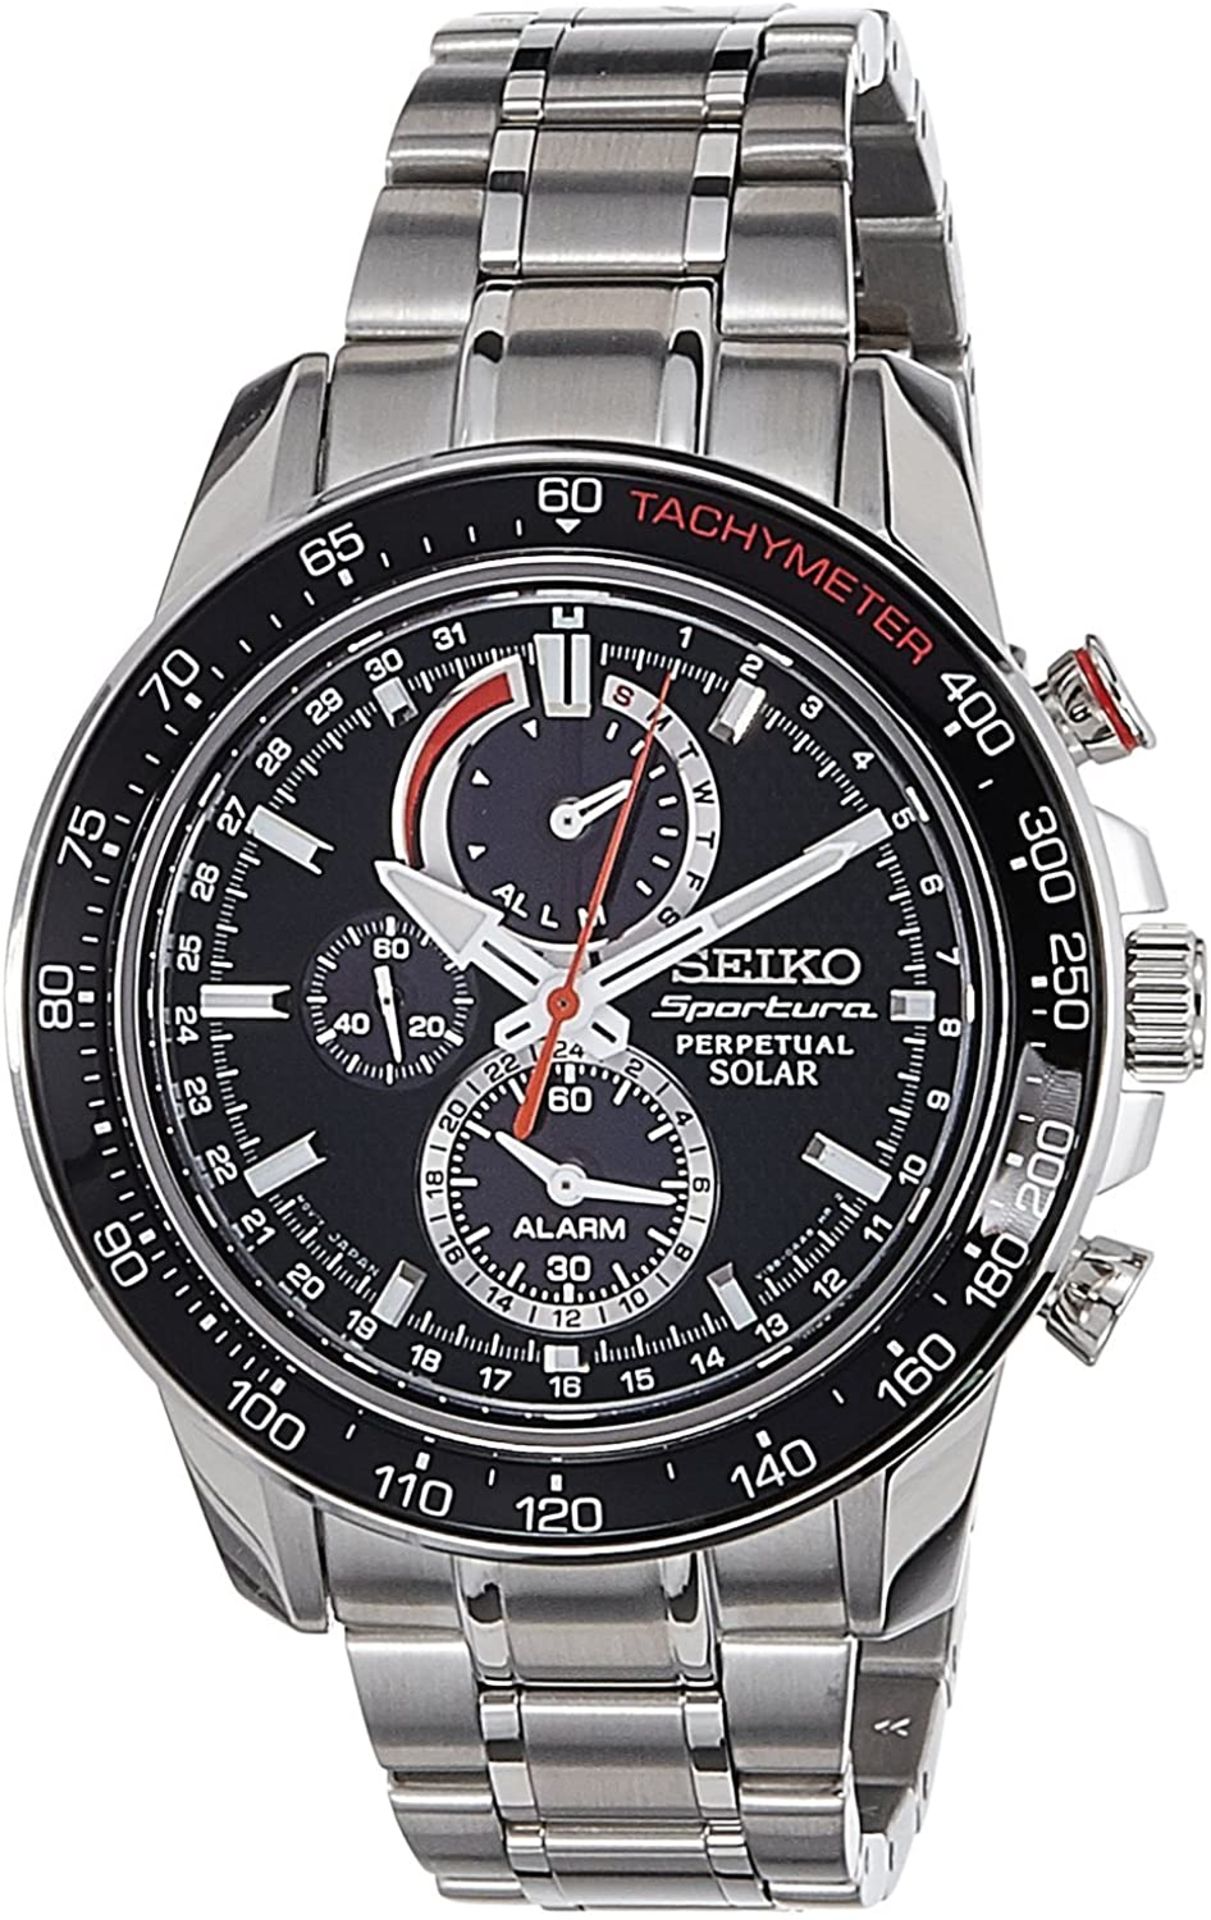 BOXED SEIKO SPORTURA PERPETUAL SOLAR GENTS WATCH, STAINLESS STEEL, RRP-£449.00, APPEARS NEW,